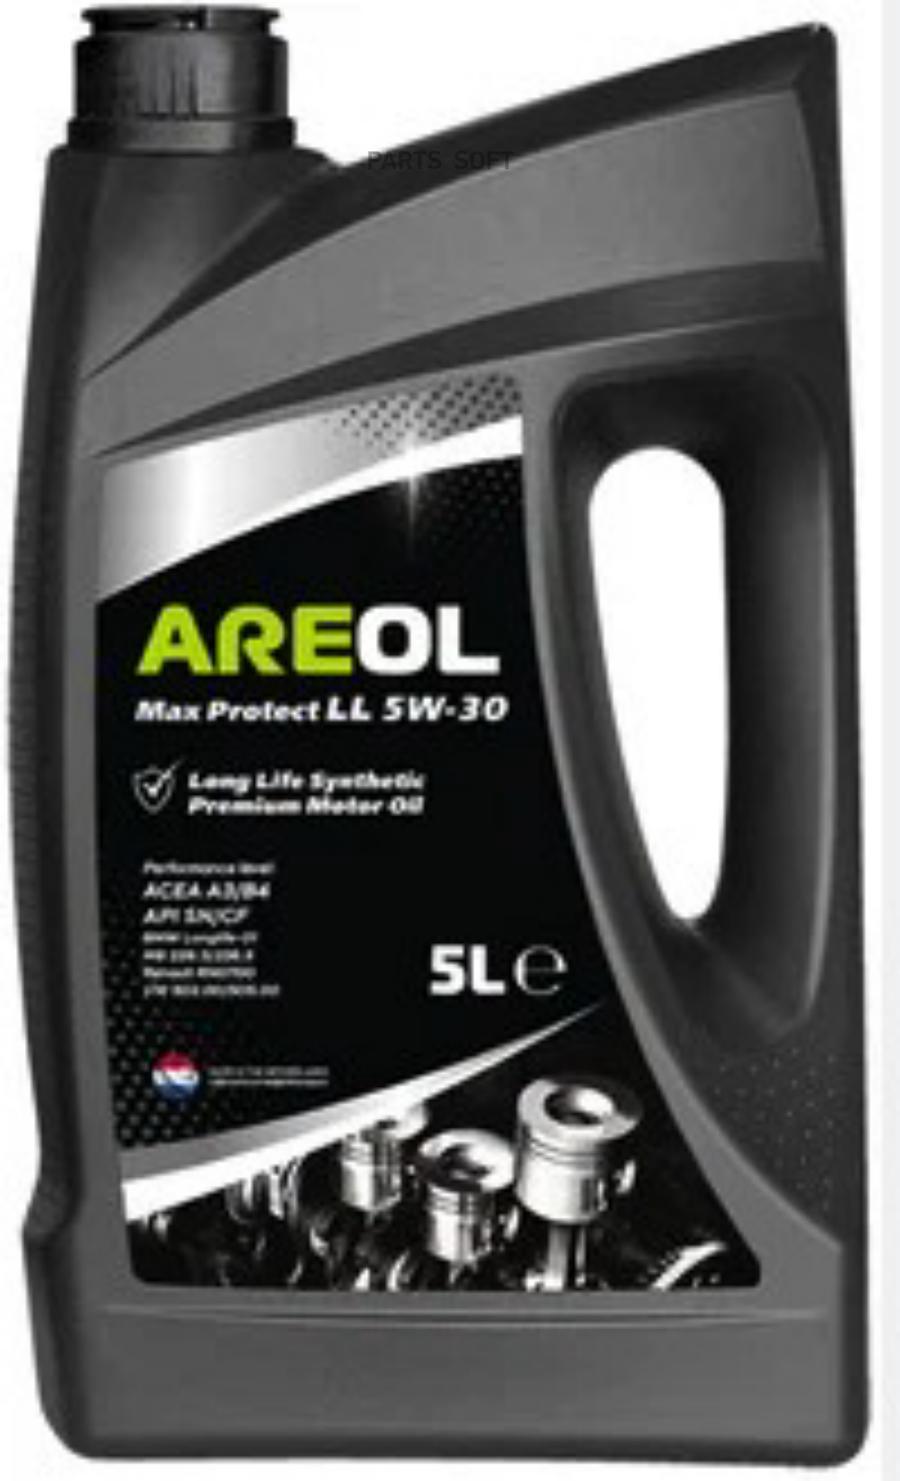 Масло ареол 5w40. Areol Max protect 5w-40 5l. Areol Eco Energy dx1. Areol Max protect f 5w-30. Areol Max protect ll 5w-30.